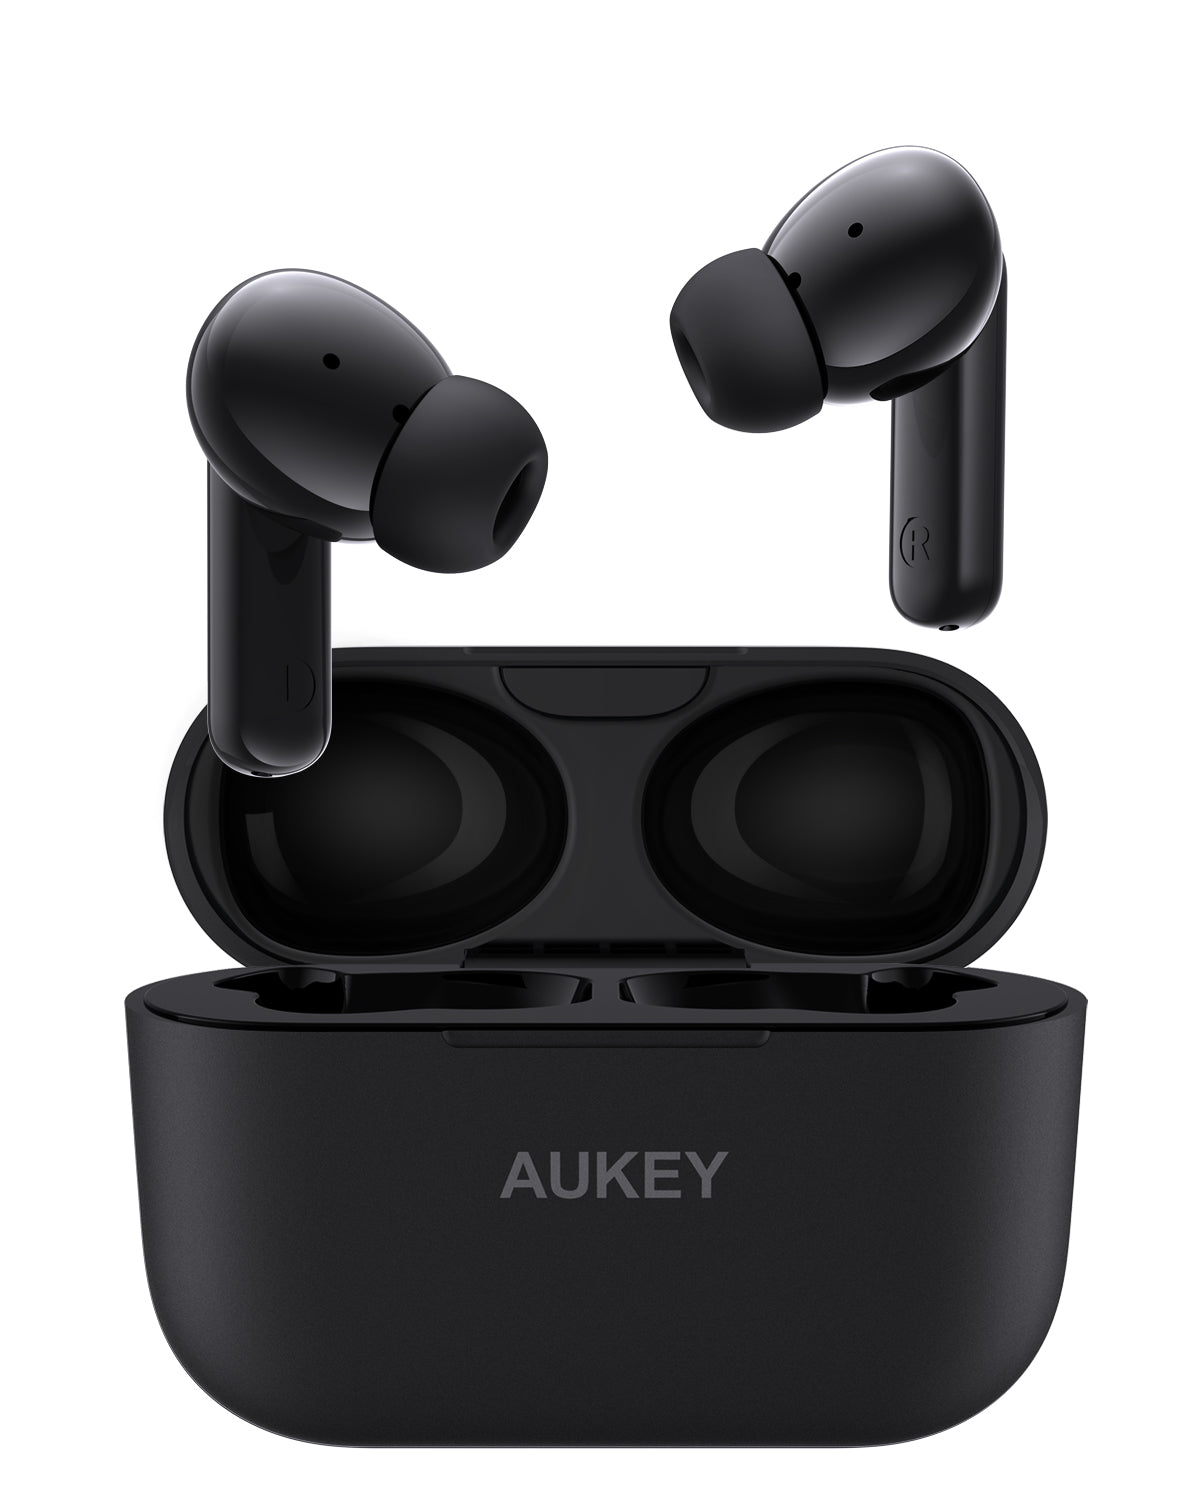 AUKEY True Wireless Earbuds with ANC EP-M1 NC